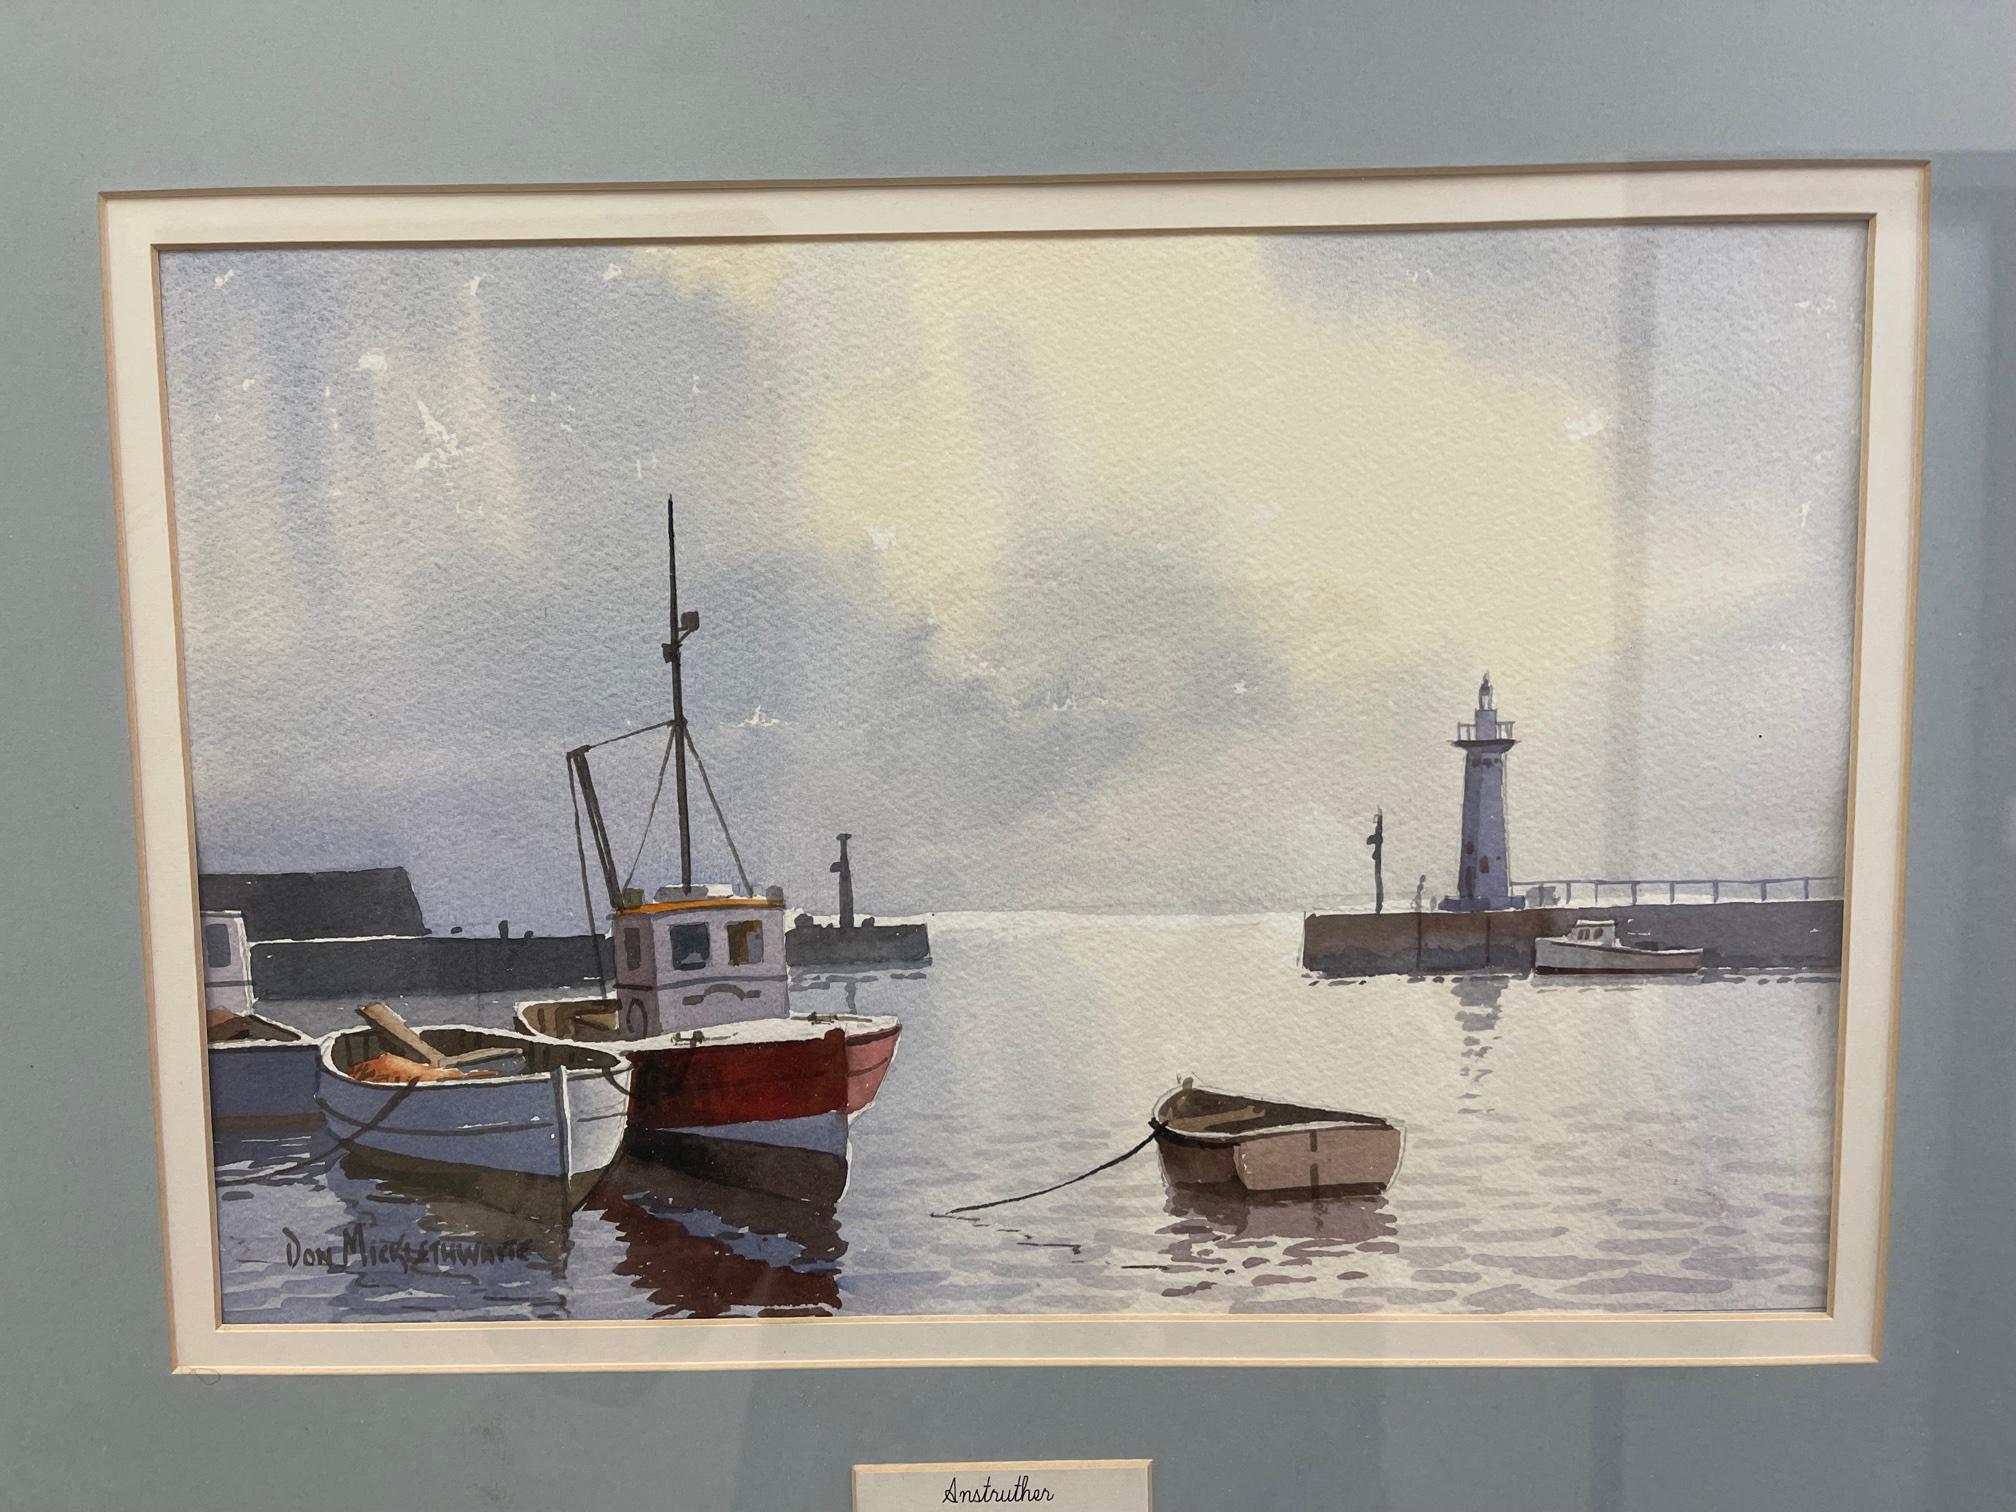 Watercolor on paper, signed Don Micklethwaite on recto (bottom left), framed size 26” L x 22” W x 1” D; unframed size 14” x 9”. Boats in a Harbour. British Artist Don Micklethwaite born in Scarborough and received a short formal training at the